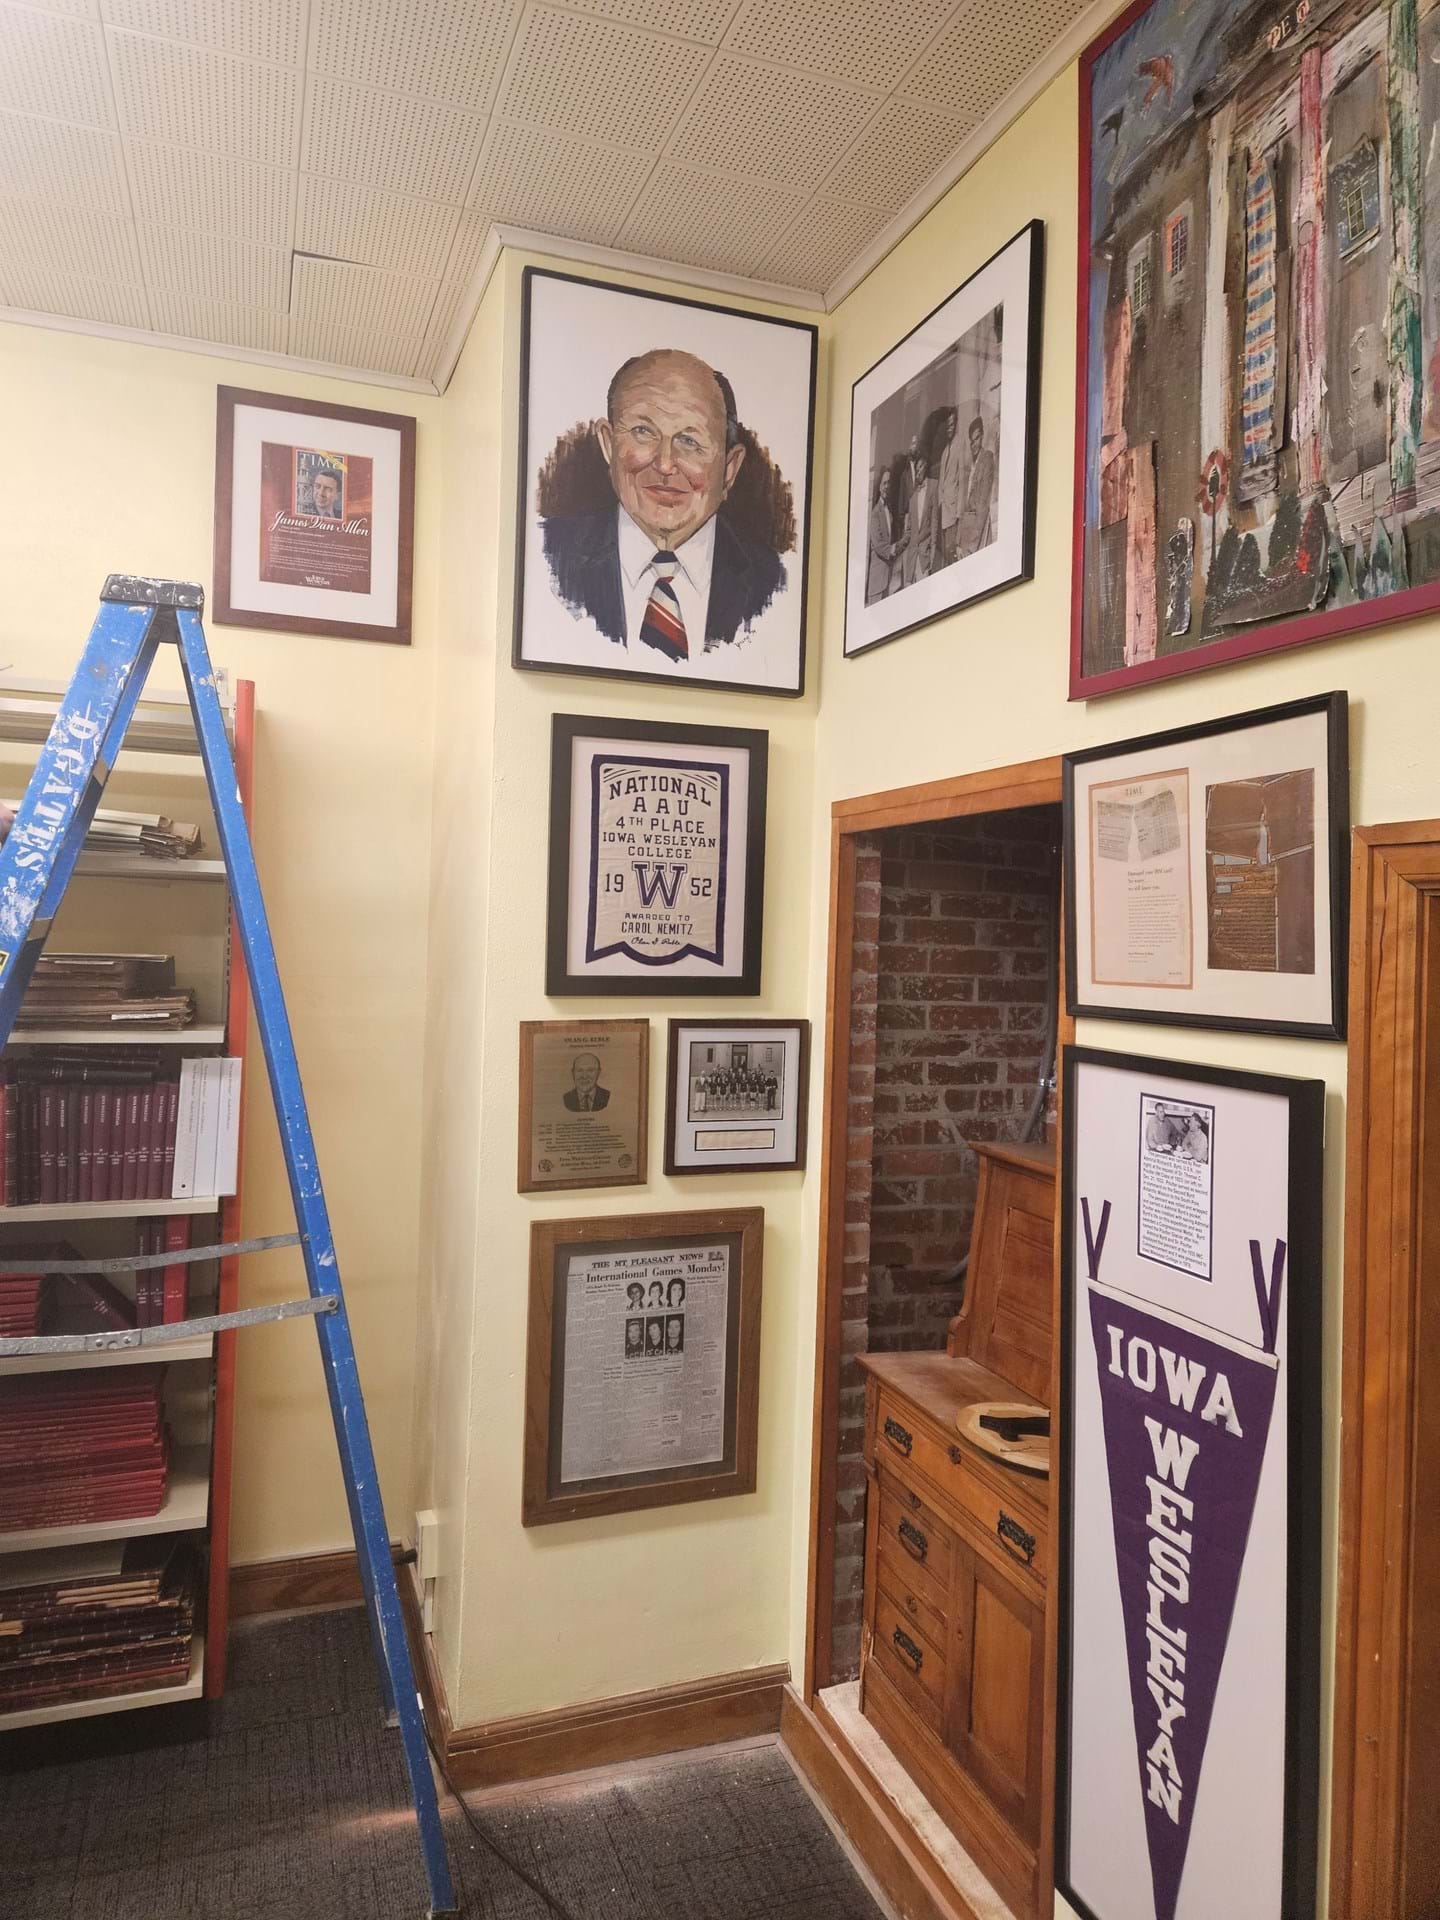 Iowa Wesleyan University Archives Room, located in the Museum.